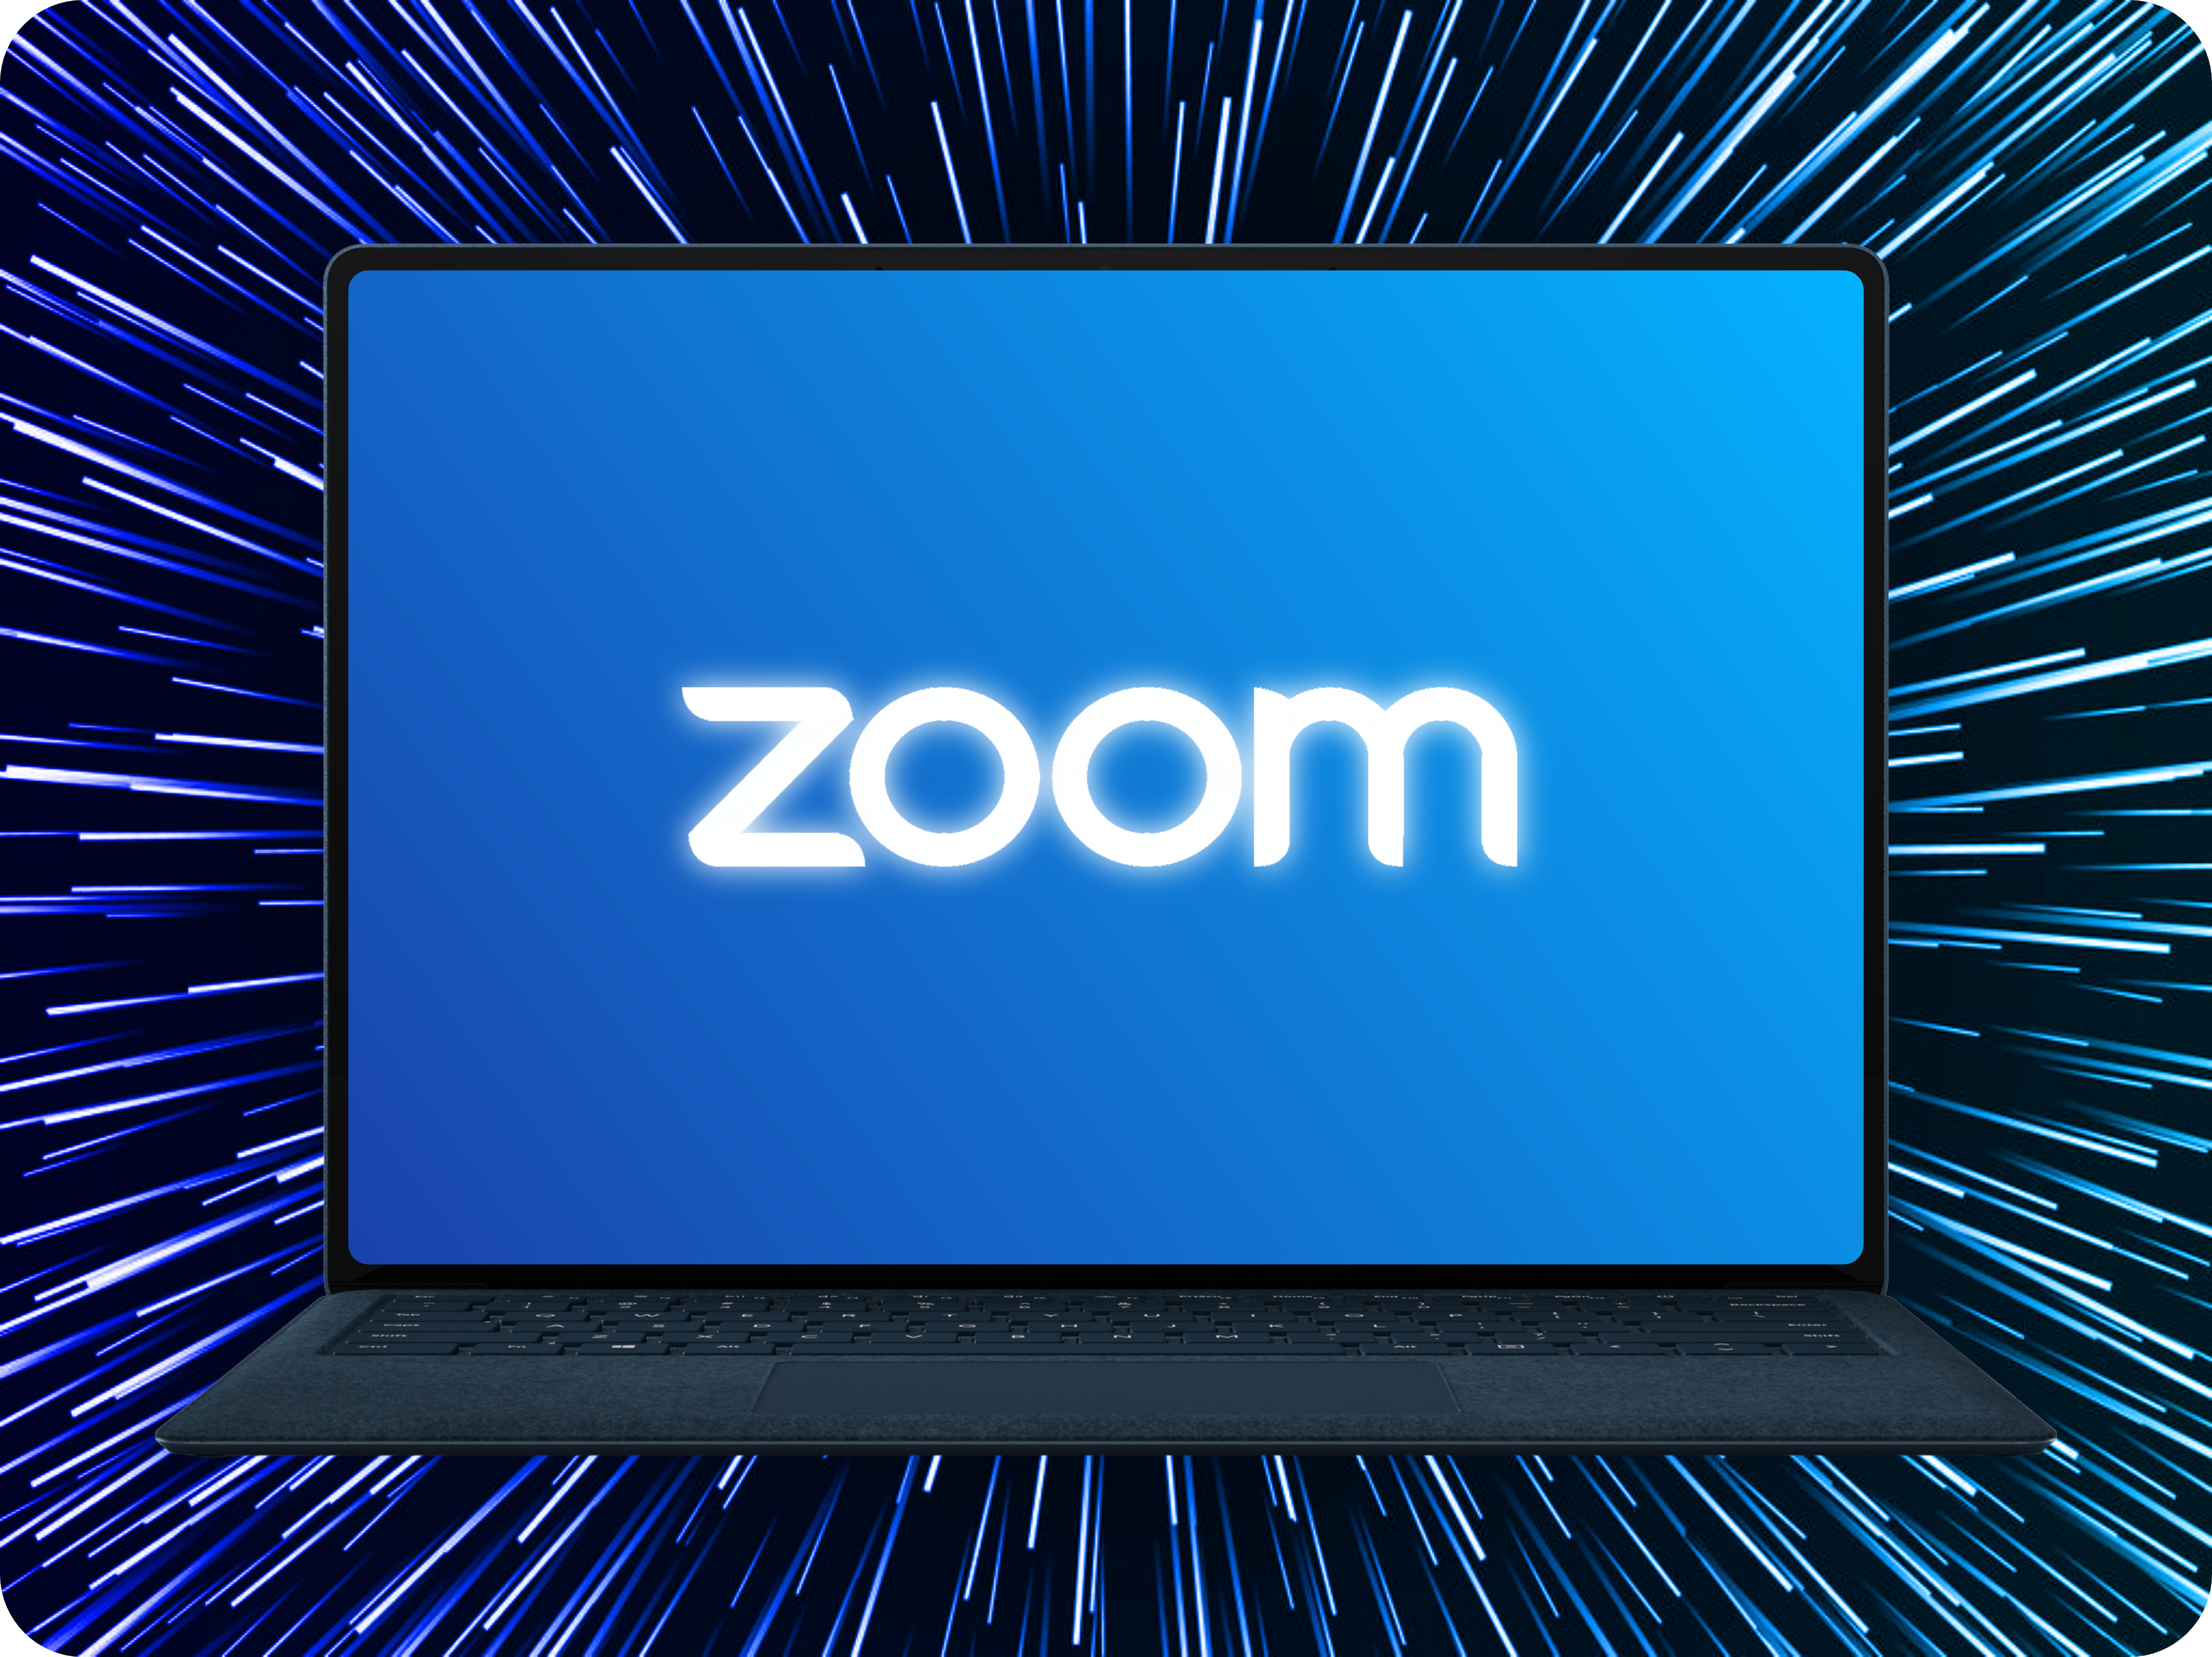 Zoom is looking to capitalize on their popular video chat app with an email and calendar app